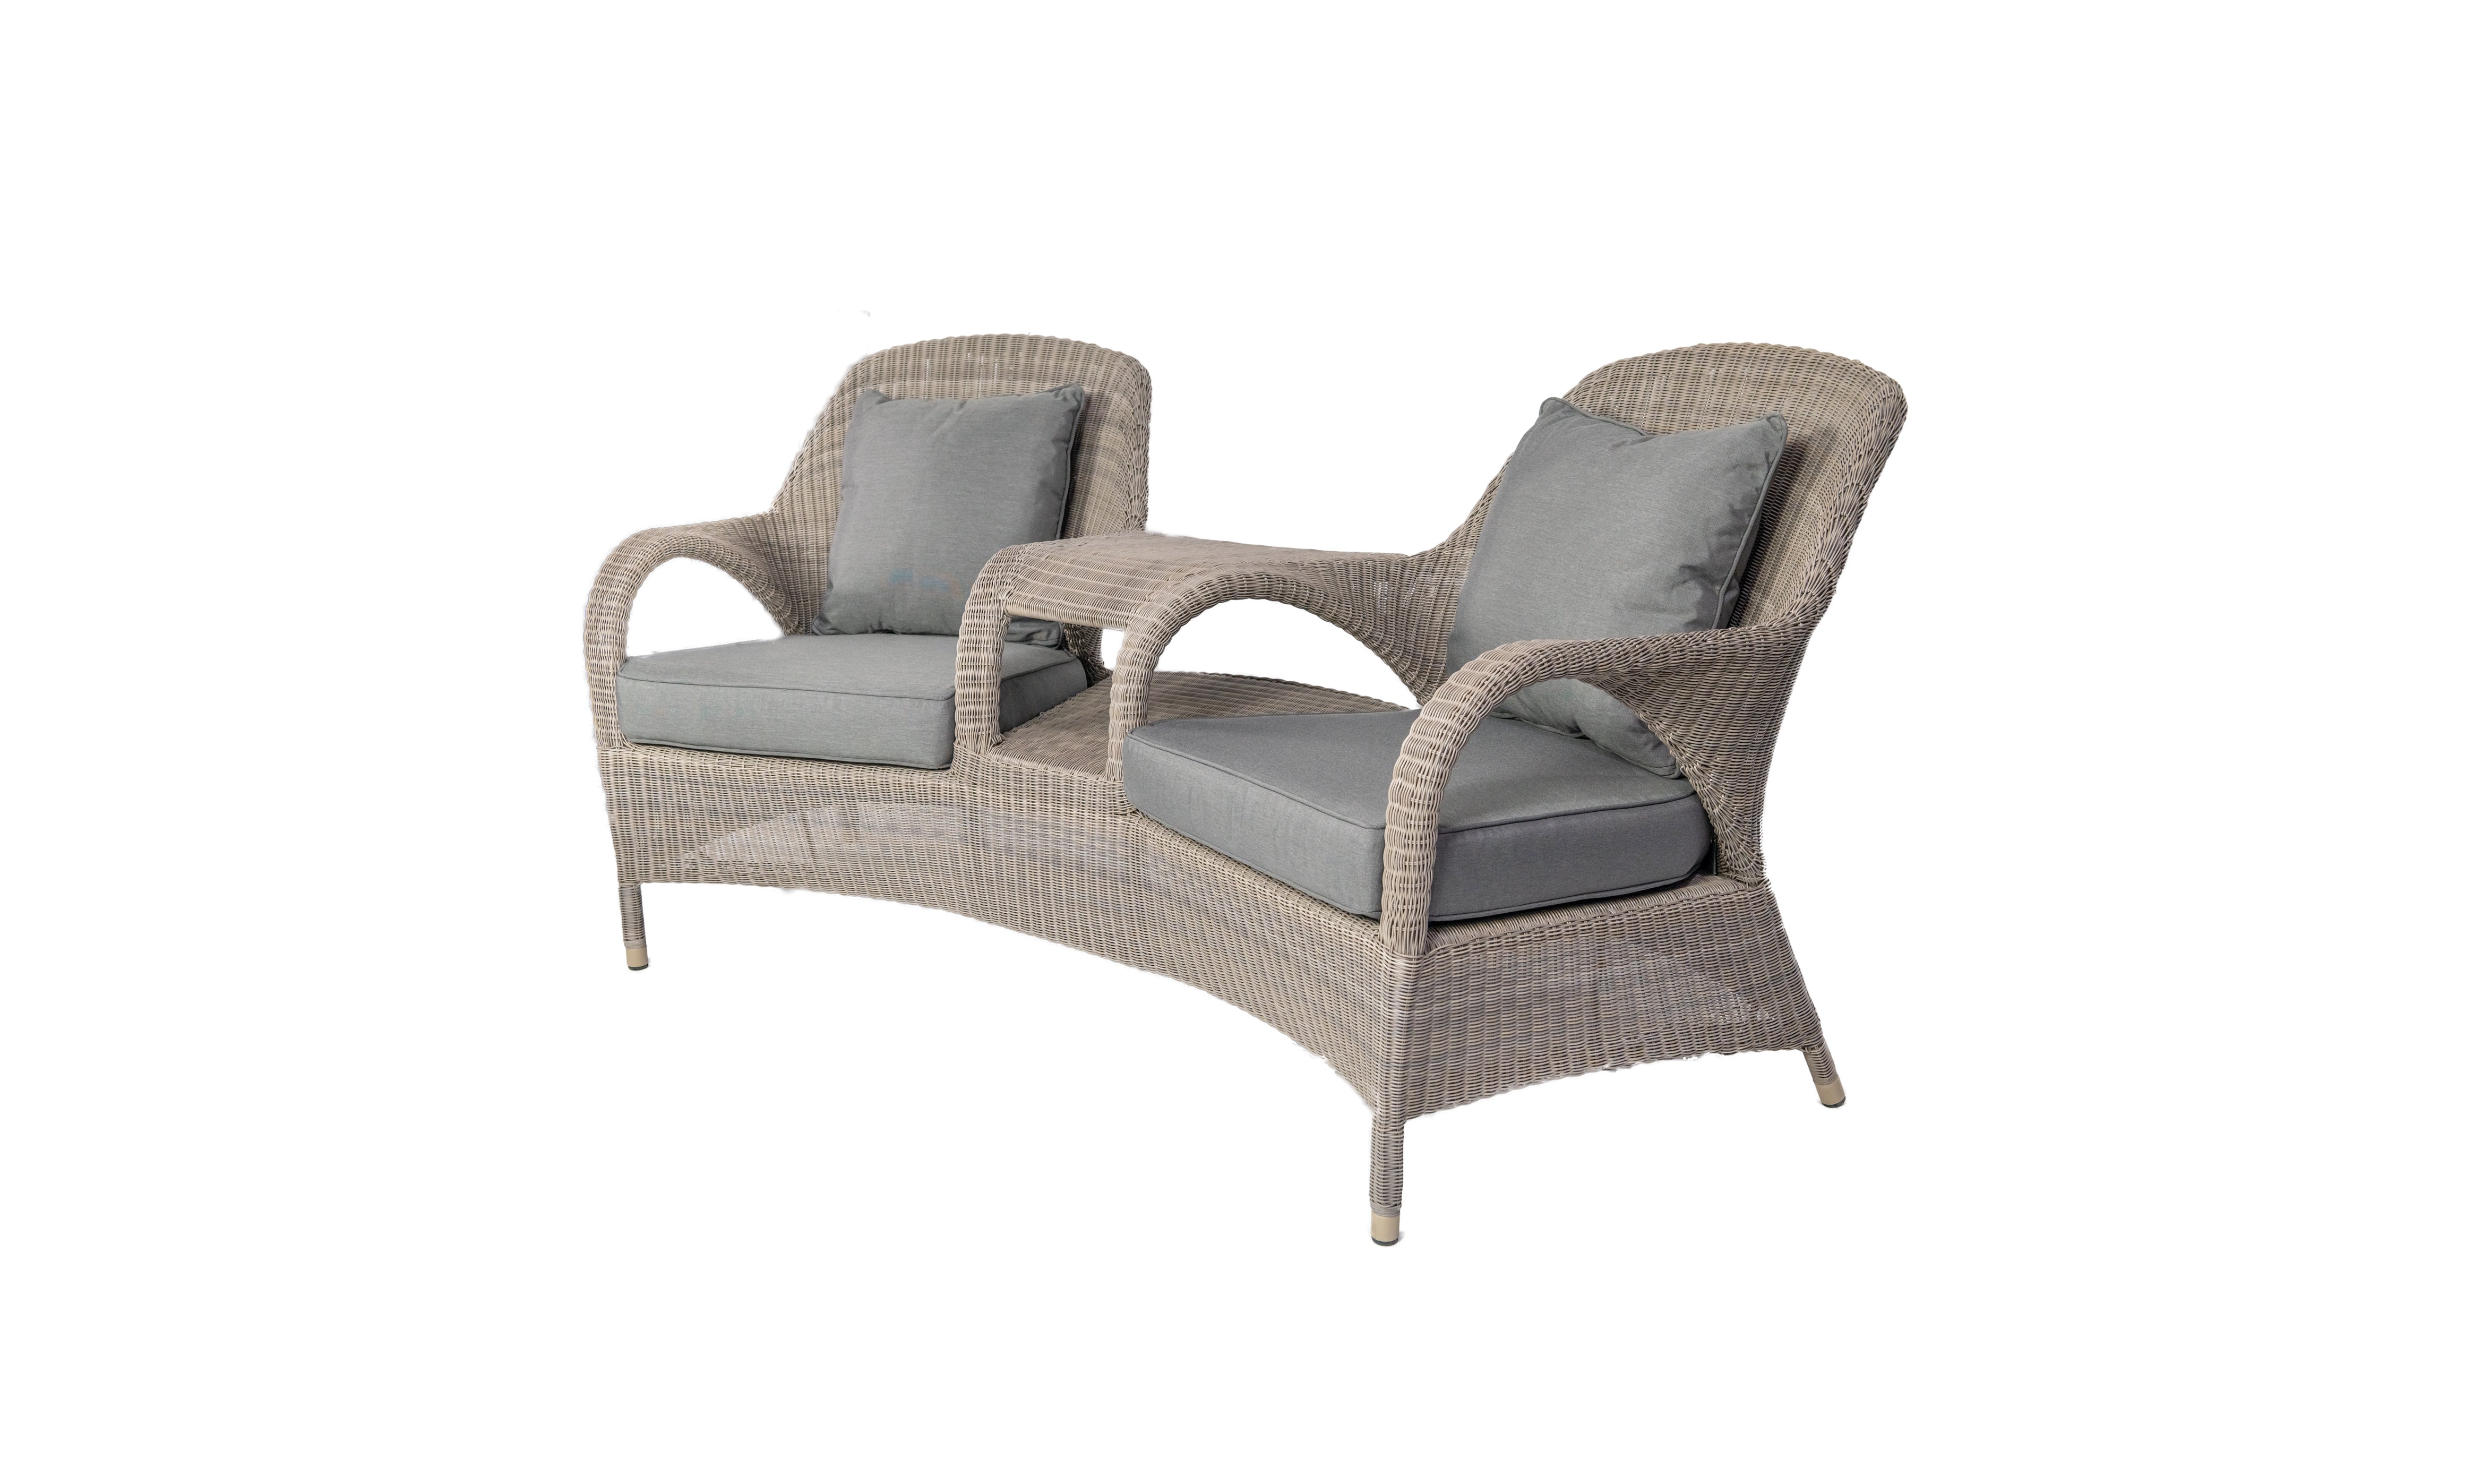 4 Seasons Outdoor Sussex Love Seat With 4 Cushions